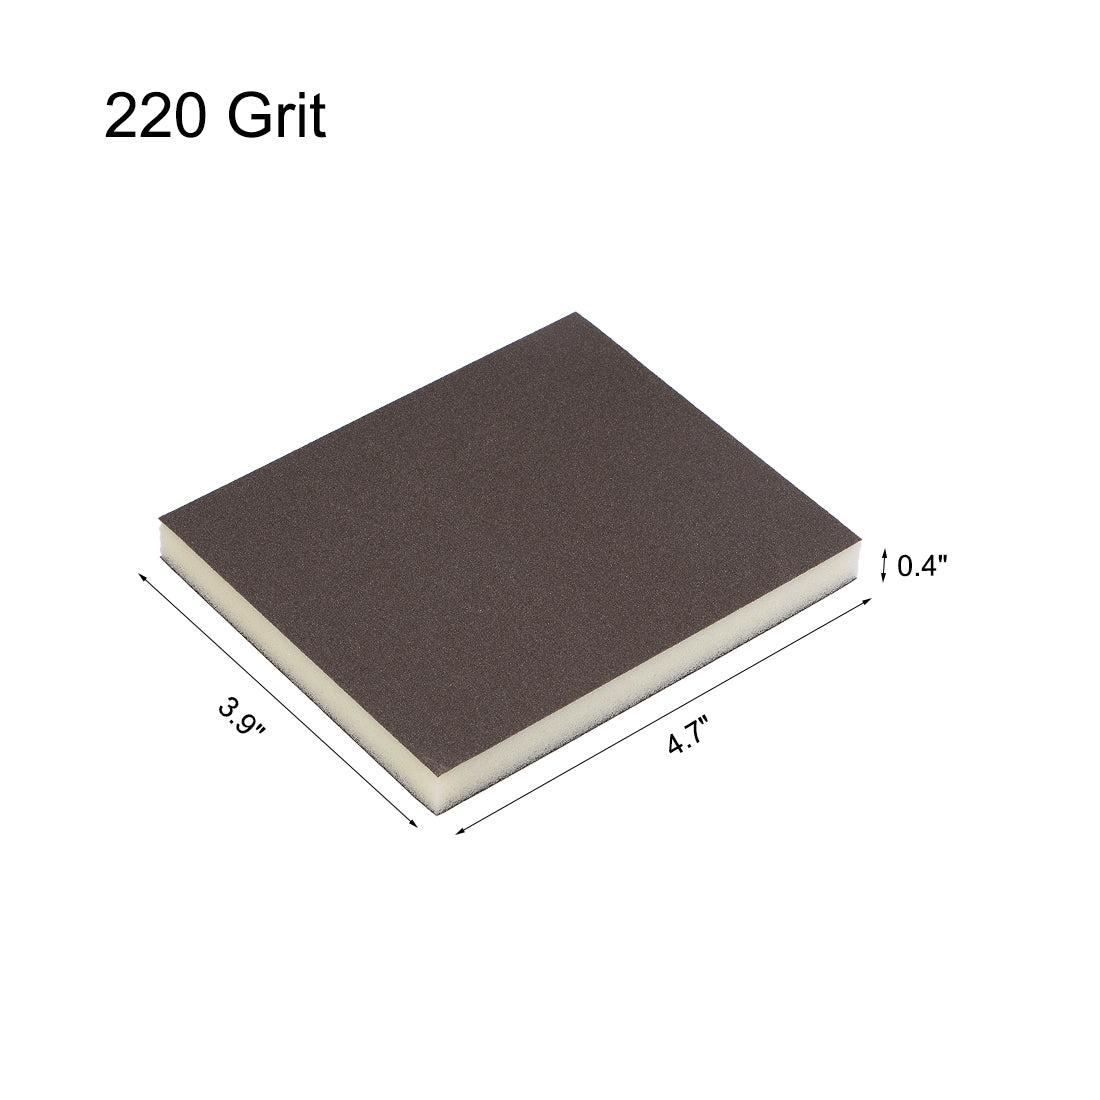 uxcell Uxcell Sanding Sponge 220 Grit Sanding Block Pad 4.7inch x 3.9inch x 0.4inch Brown 2pcs